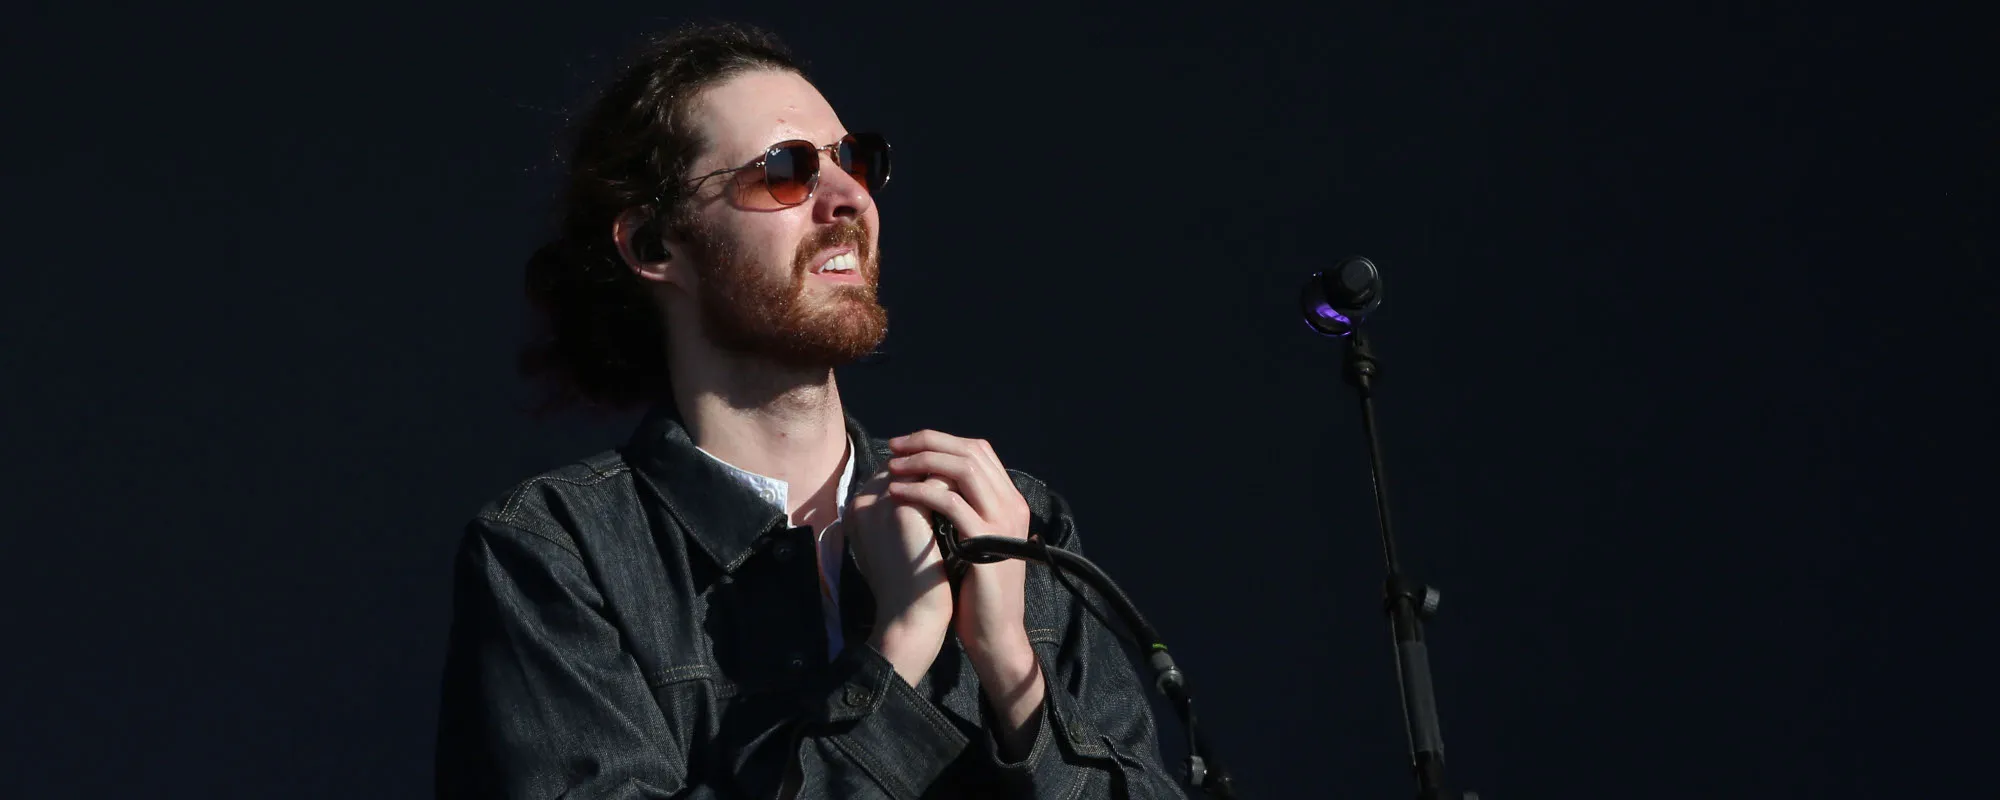 The Meaning Behind the Elegiac Hymn “Work Song” by Hozier